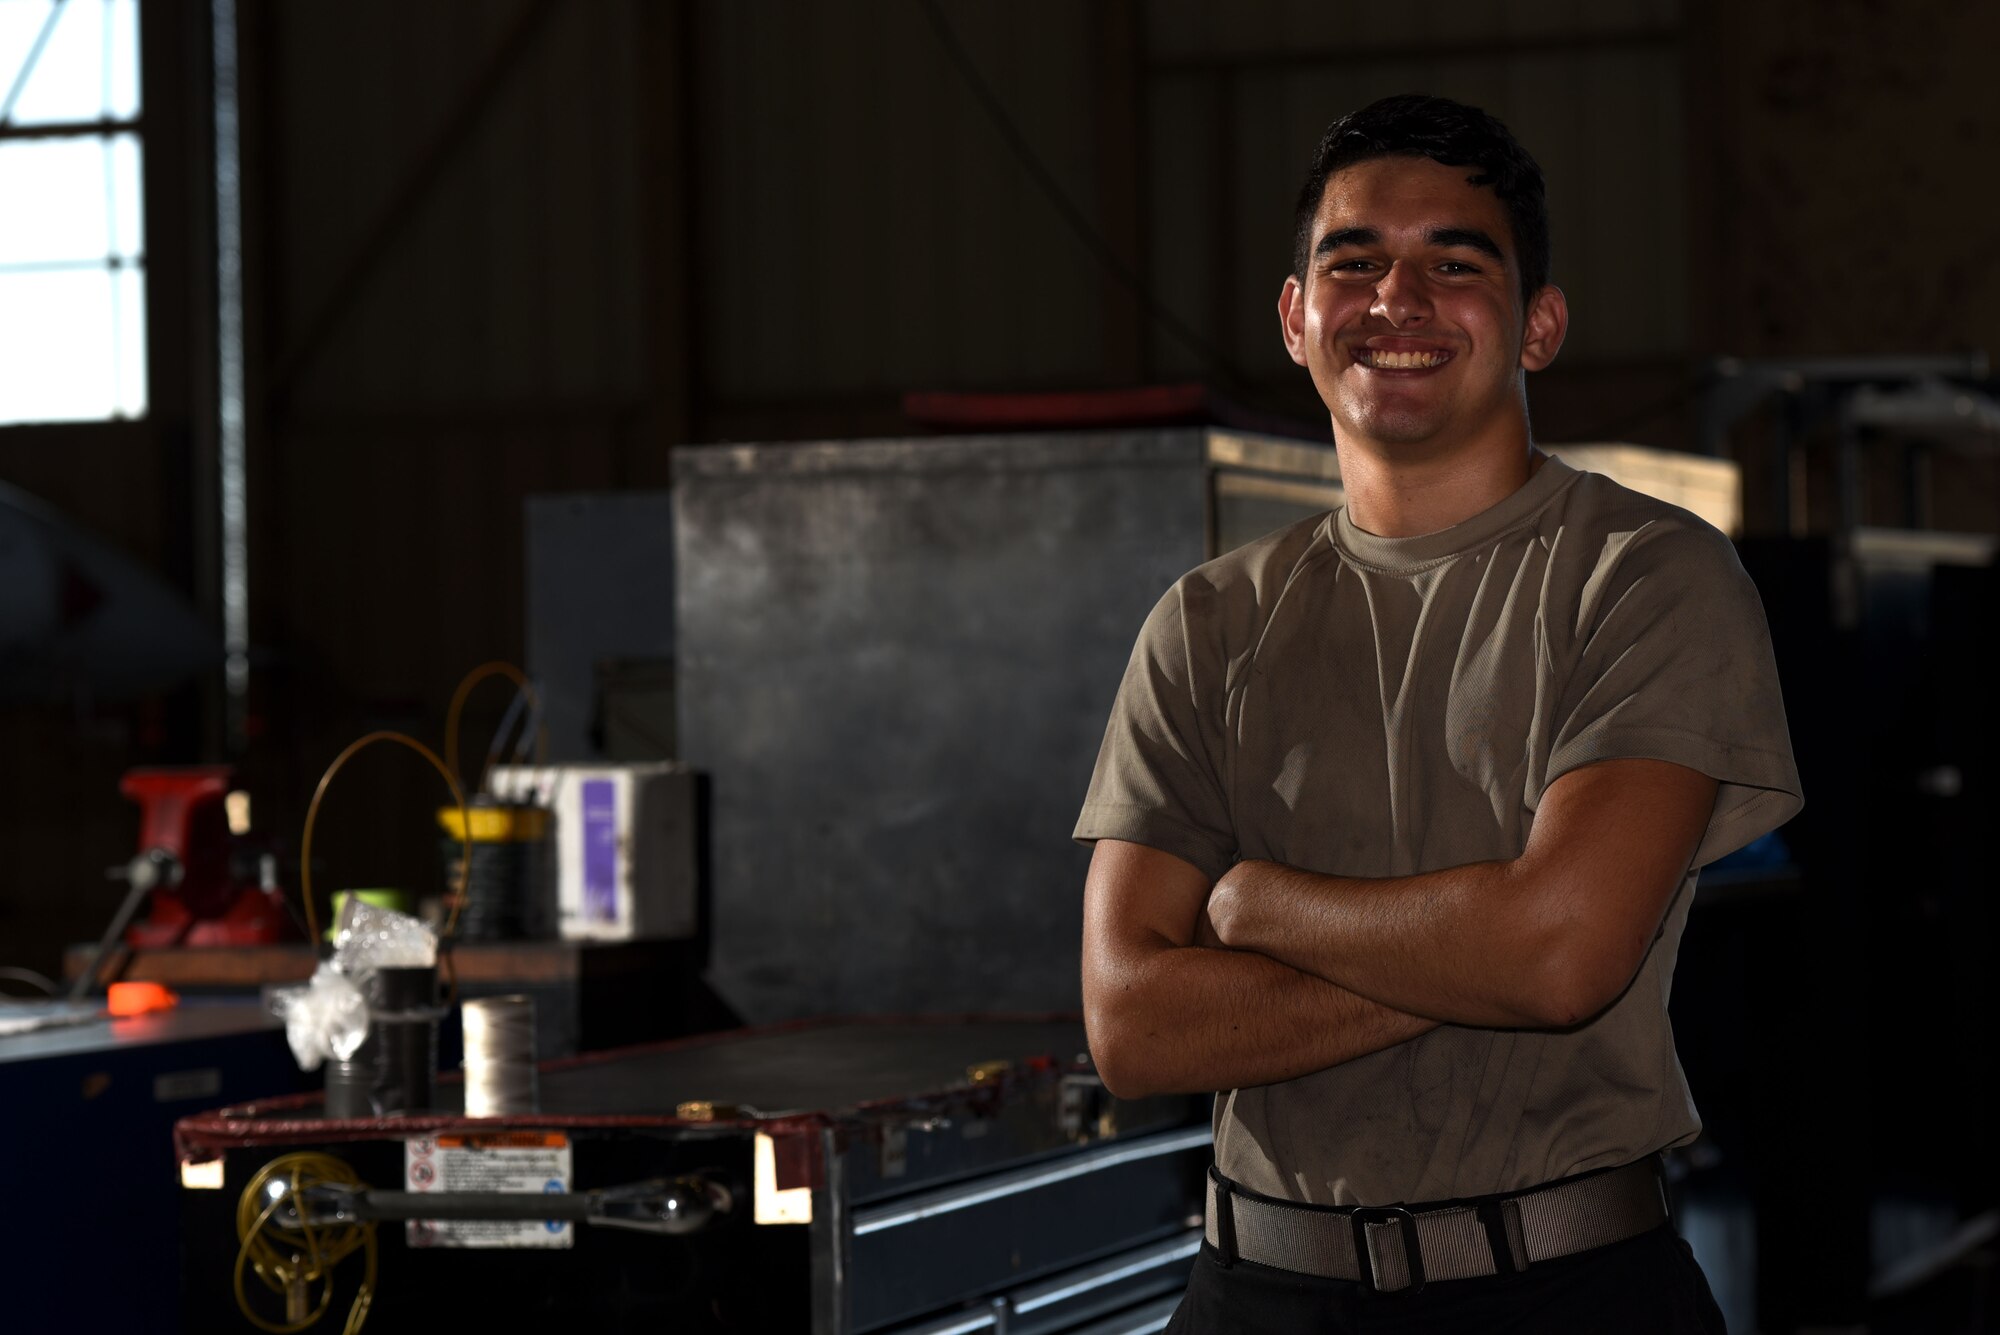 U.S. Air Force Airman 1st Class Jimmy Knutson, 20th Equipment Maintenance Squadron tactical aircraft maintainer, stands next to toolboxes in his work center at Shaw Air Force Base, S.C., Aug. 10, 2018.